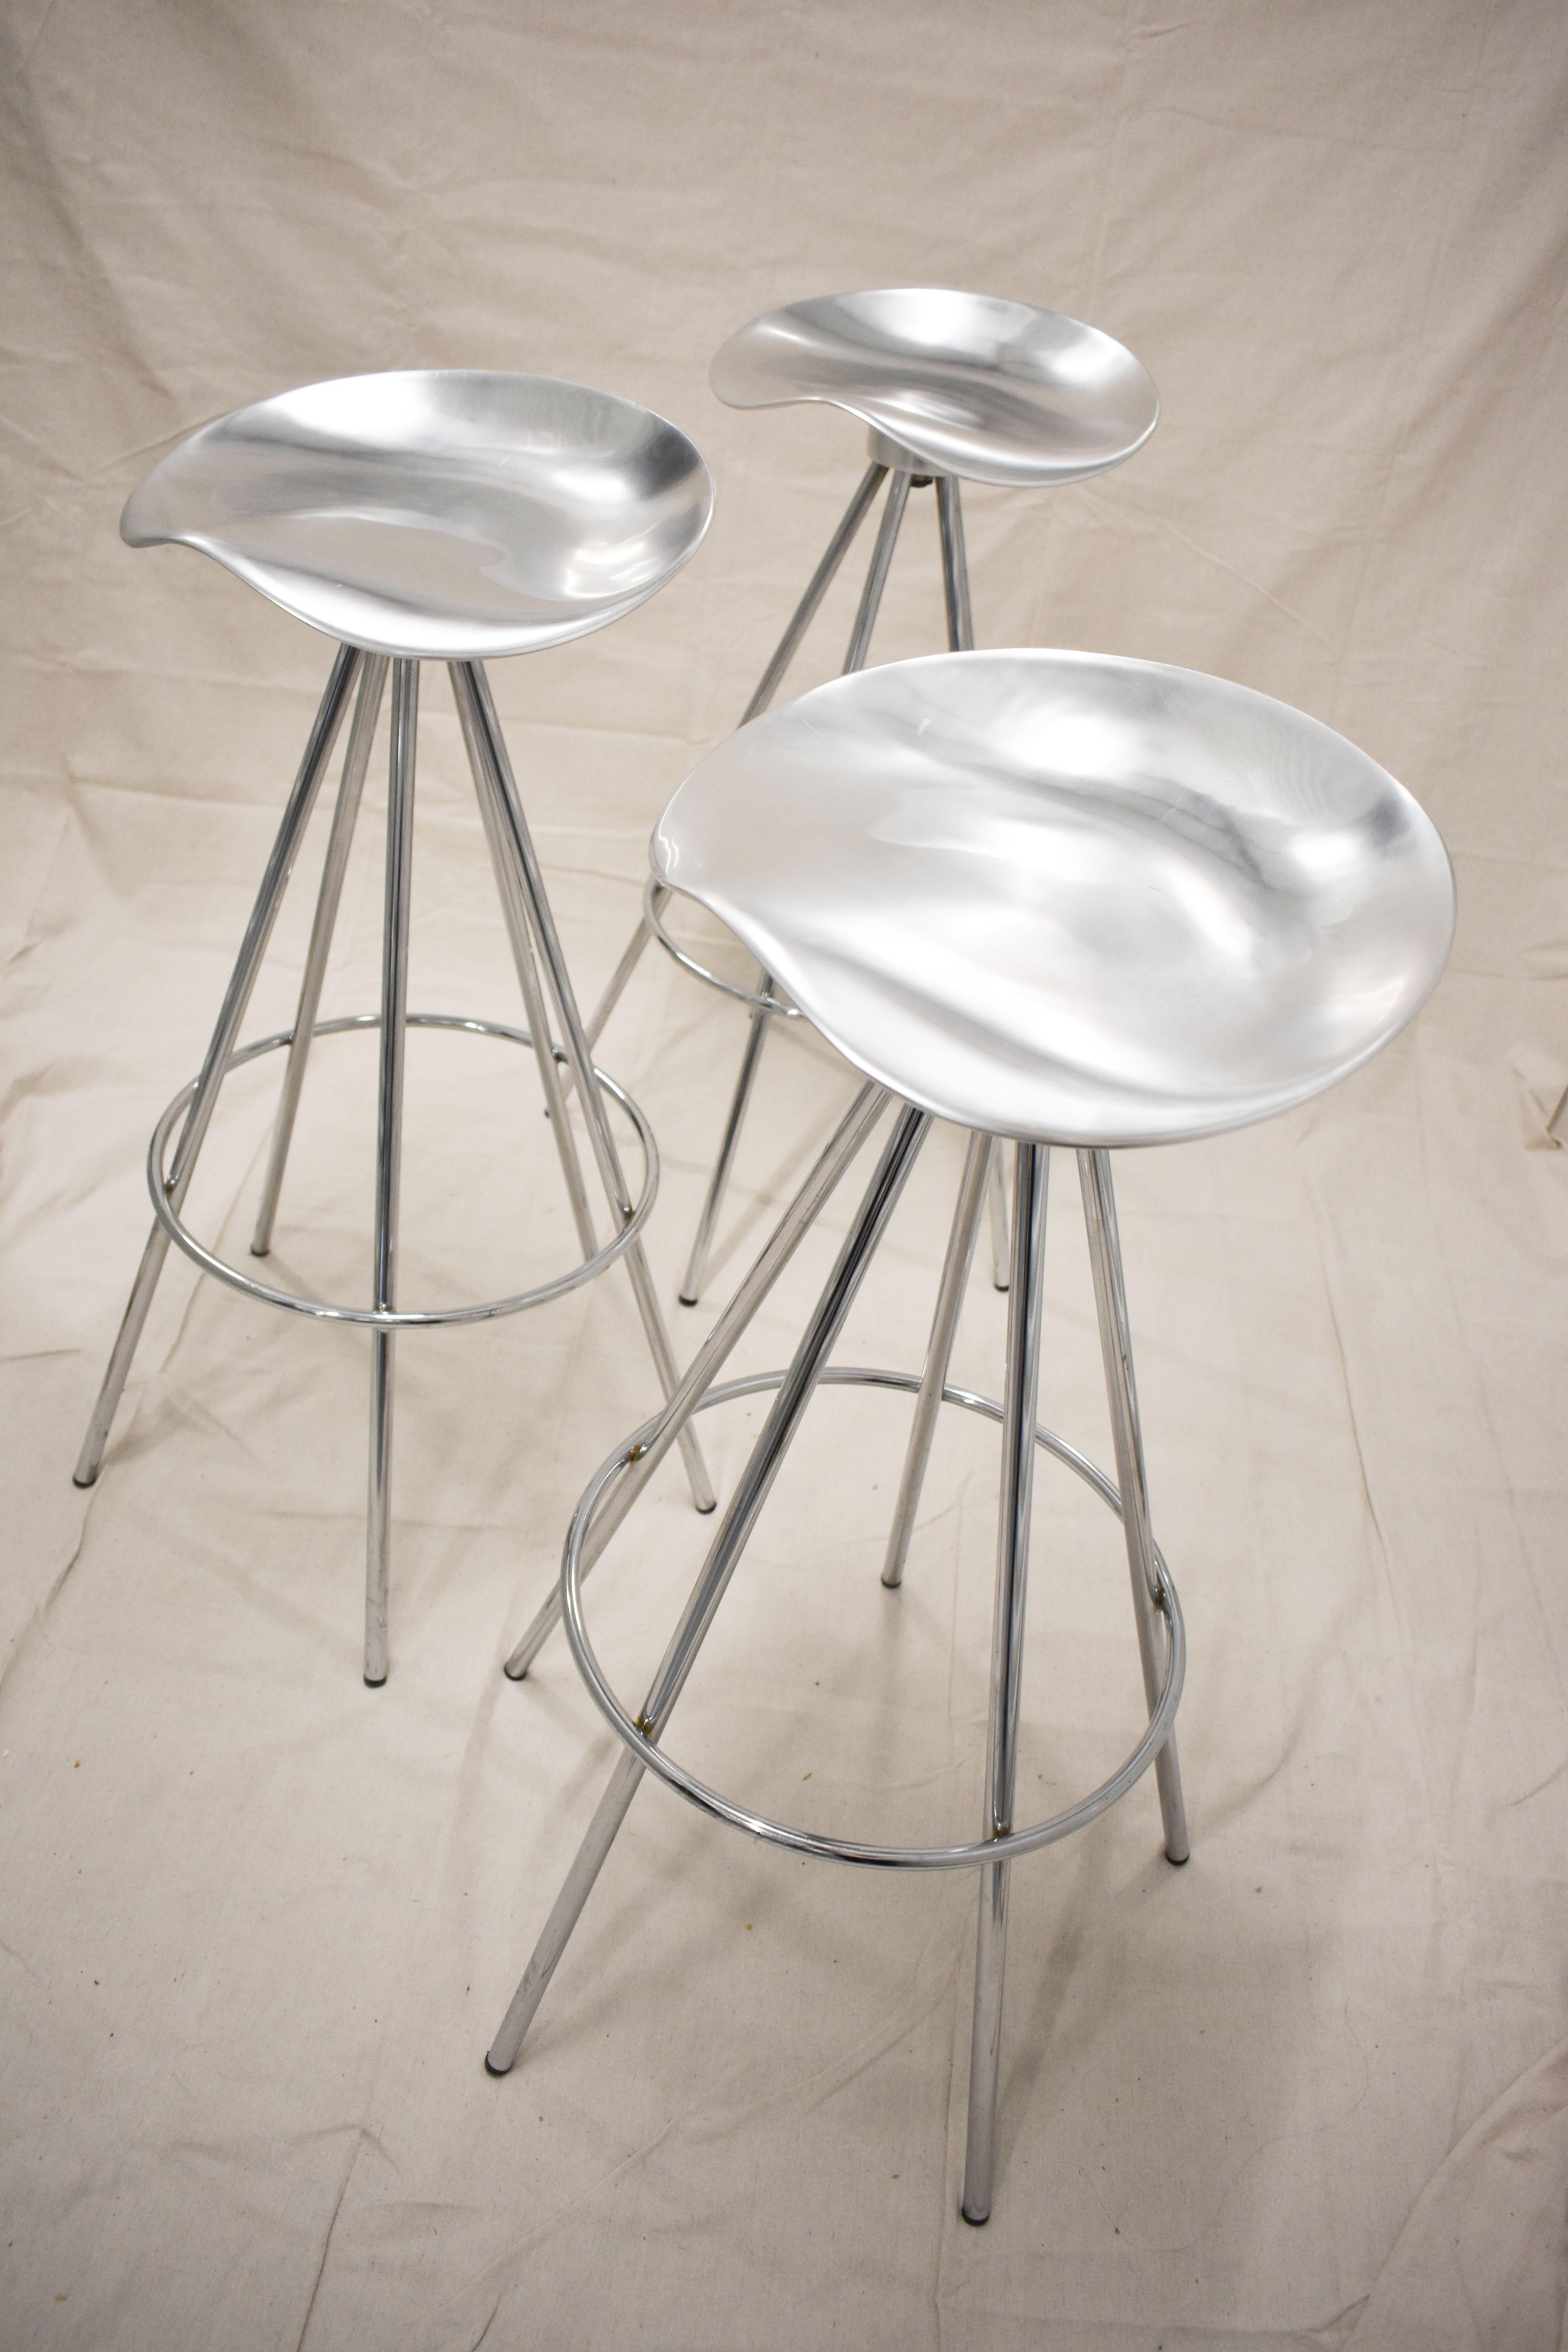 bar stools for sale in jamaica